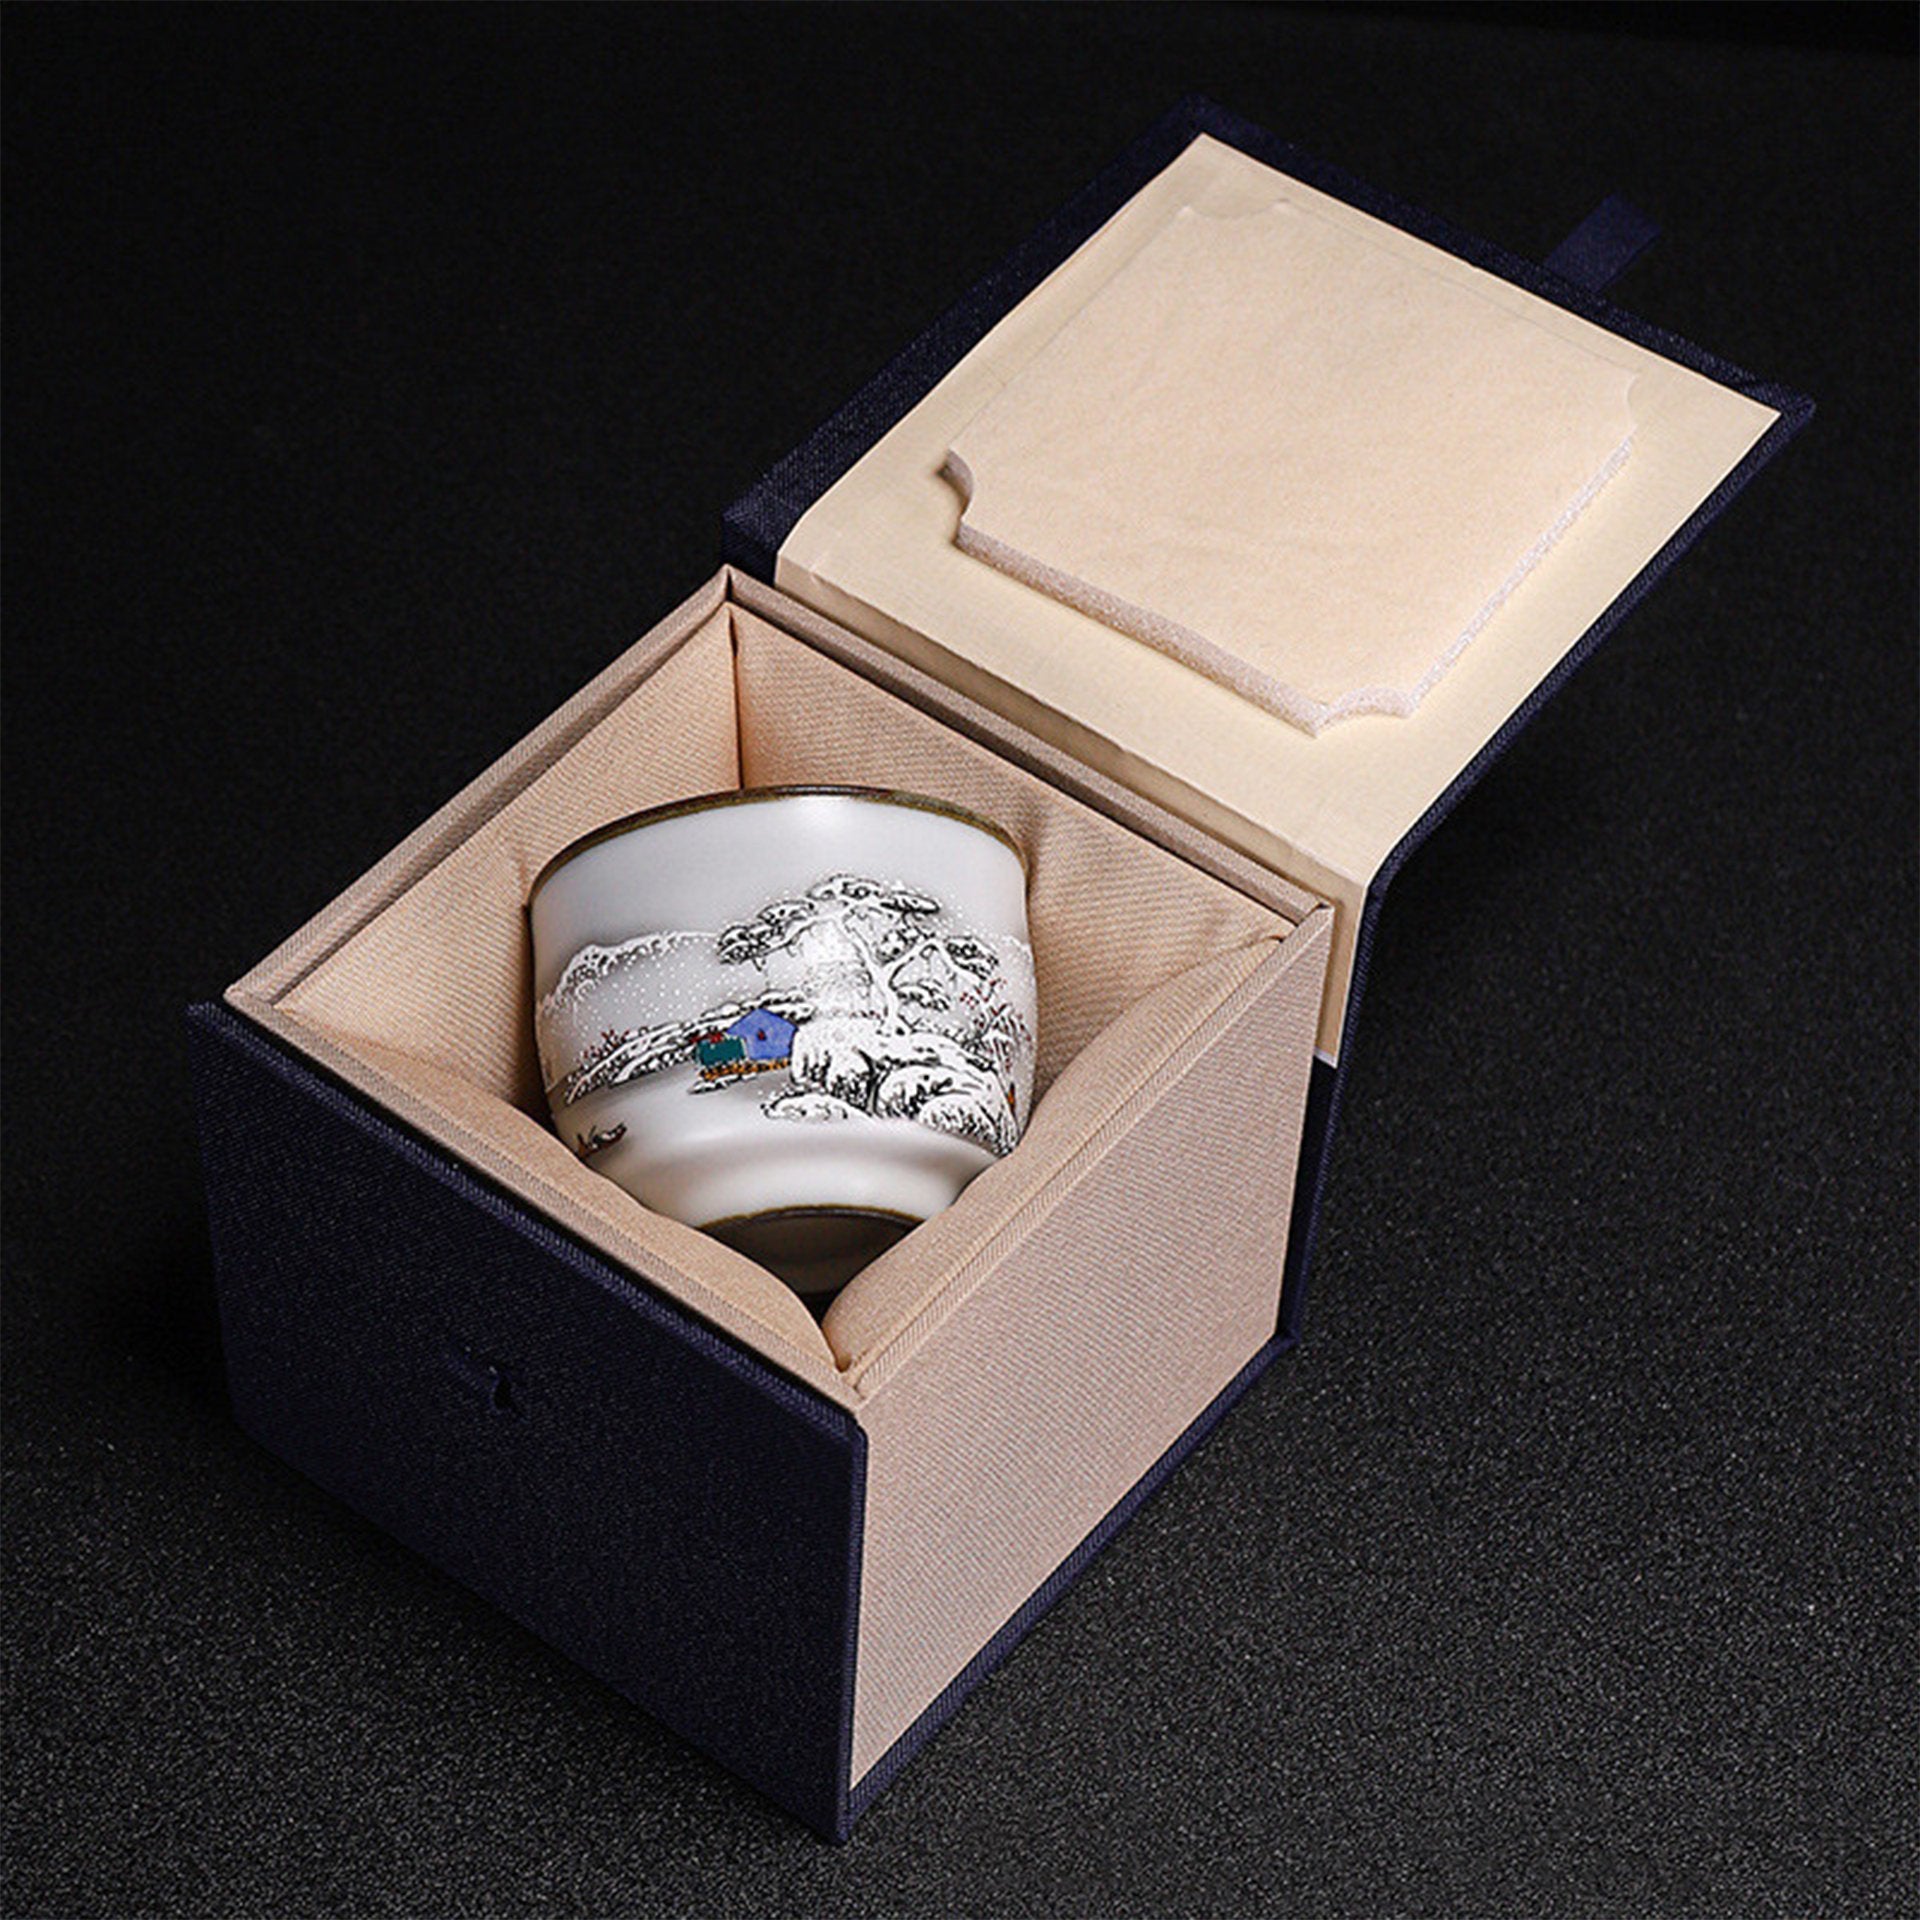 A white Japanese tea cup in a gift box